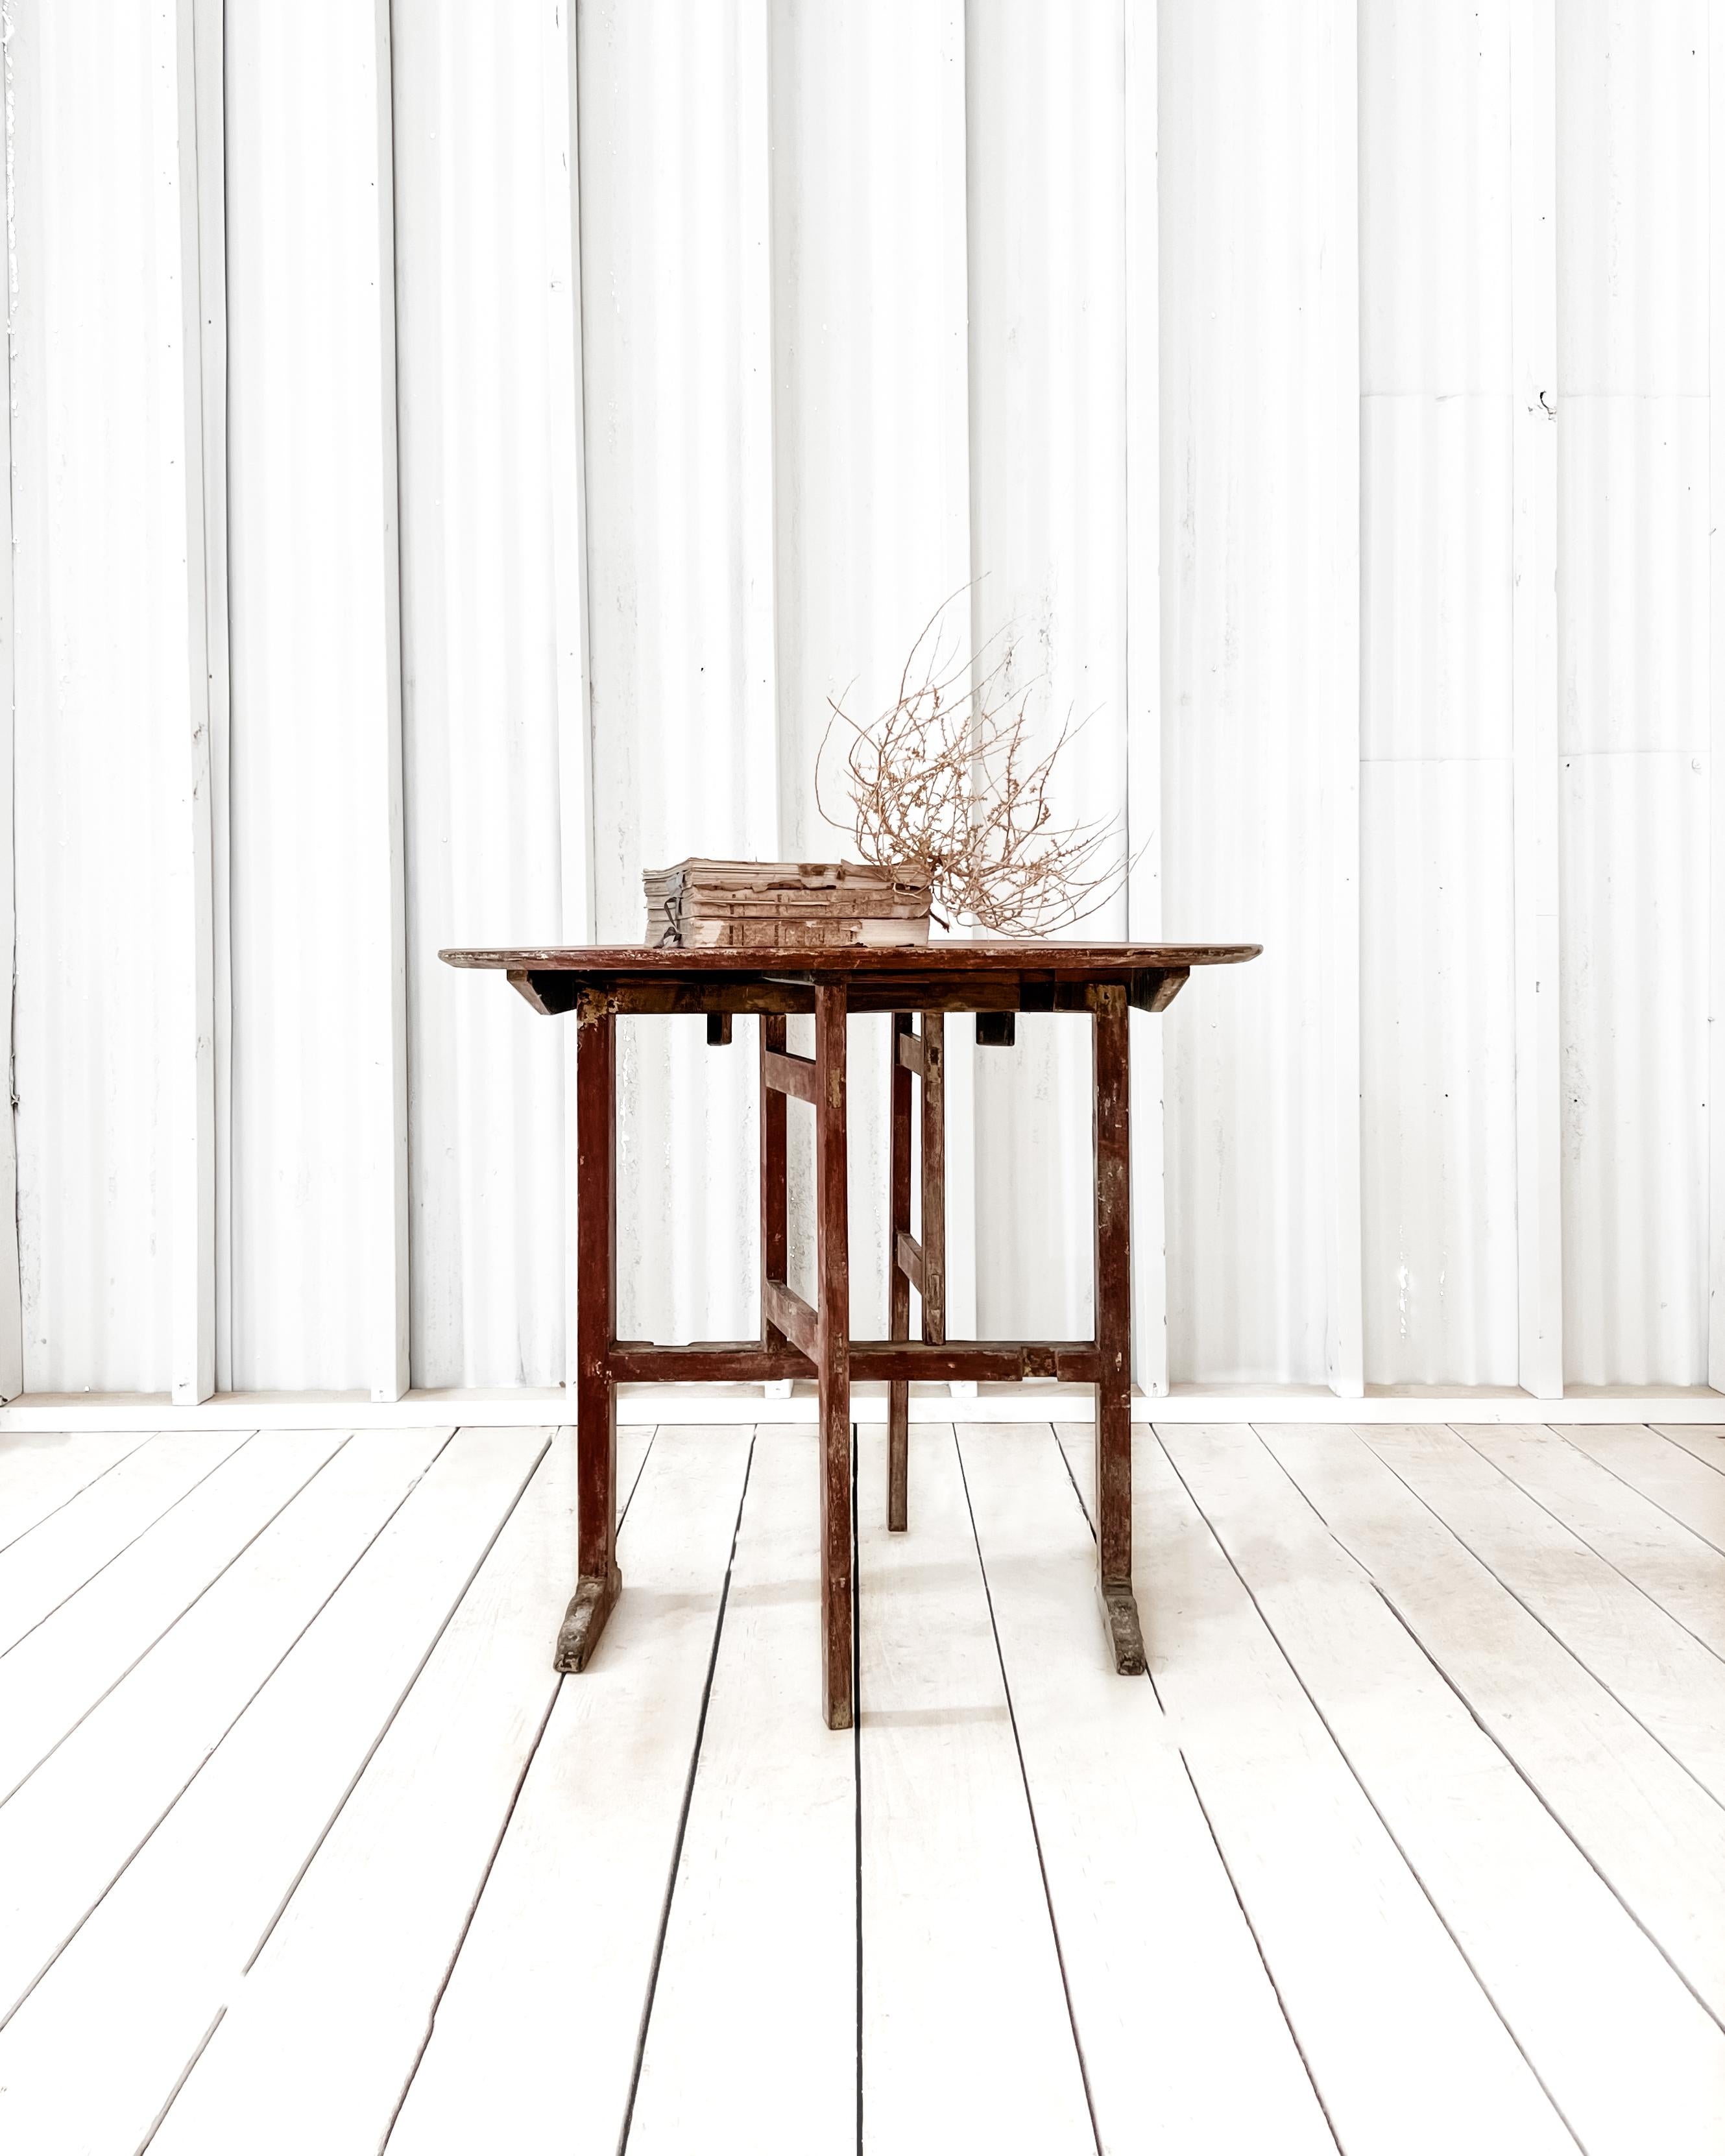 Once used for serving tea, drinks, or desserts during dinner parties and gatherings in the past, this table’s unique design allows it to be neatly tucked away when not in use. Featuring a beautiful shade of “Swedish pink” paint, with a dry-scraped